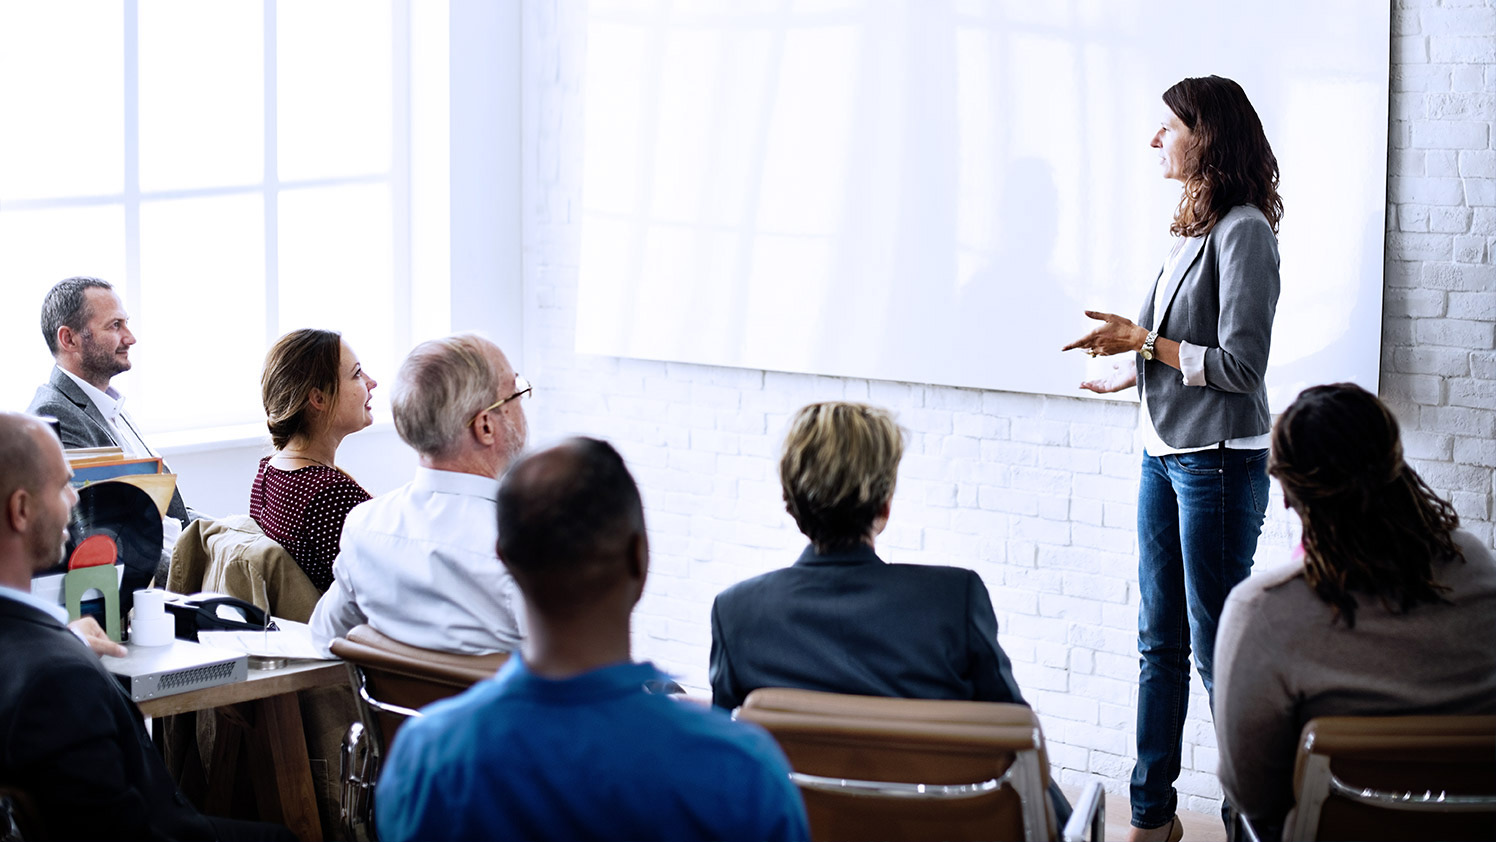 Woman speaking to a group of people in front of a whiteboard